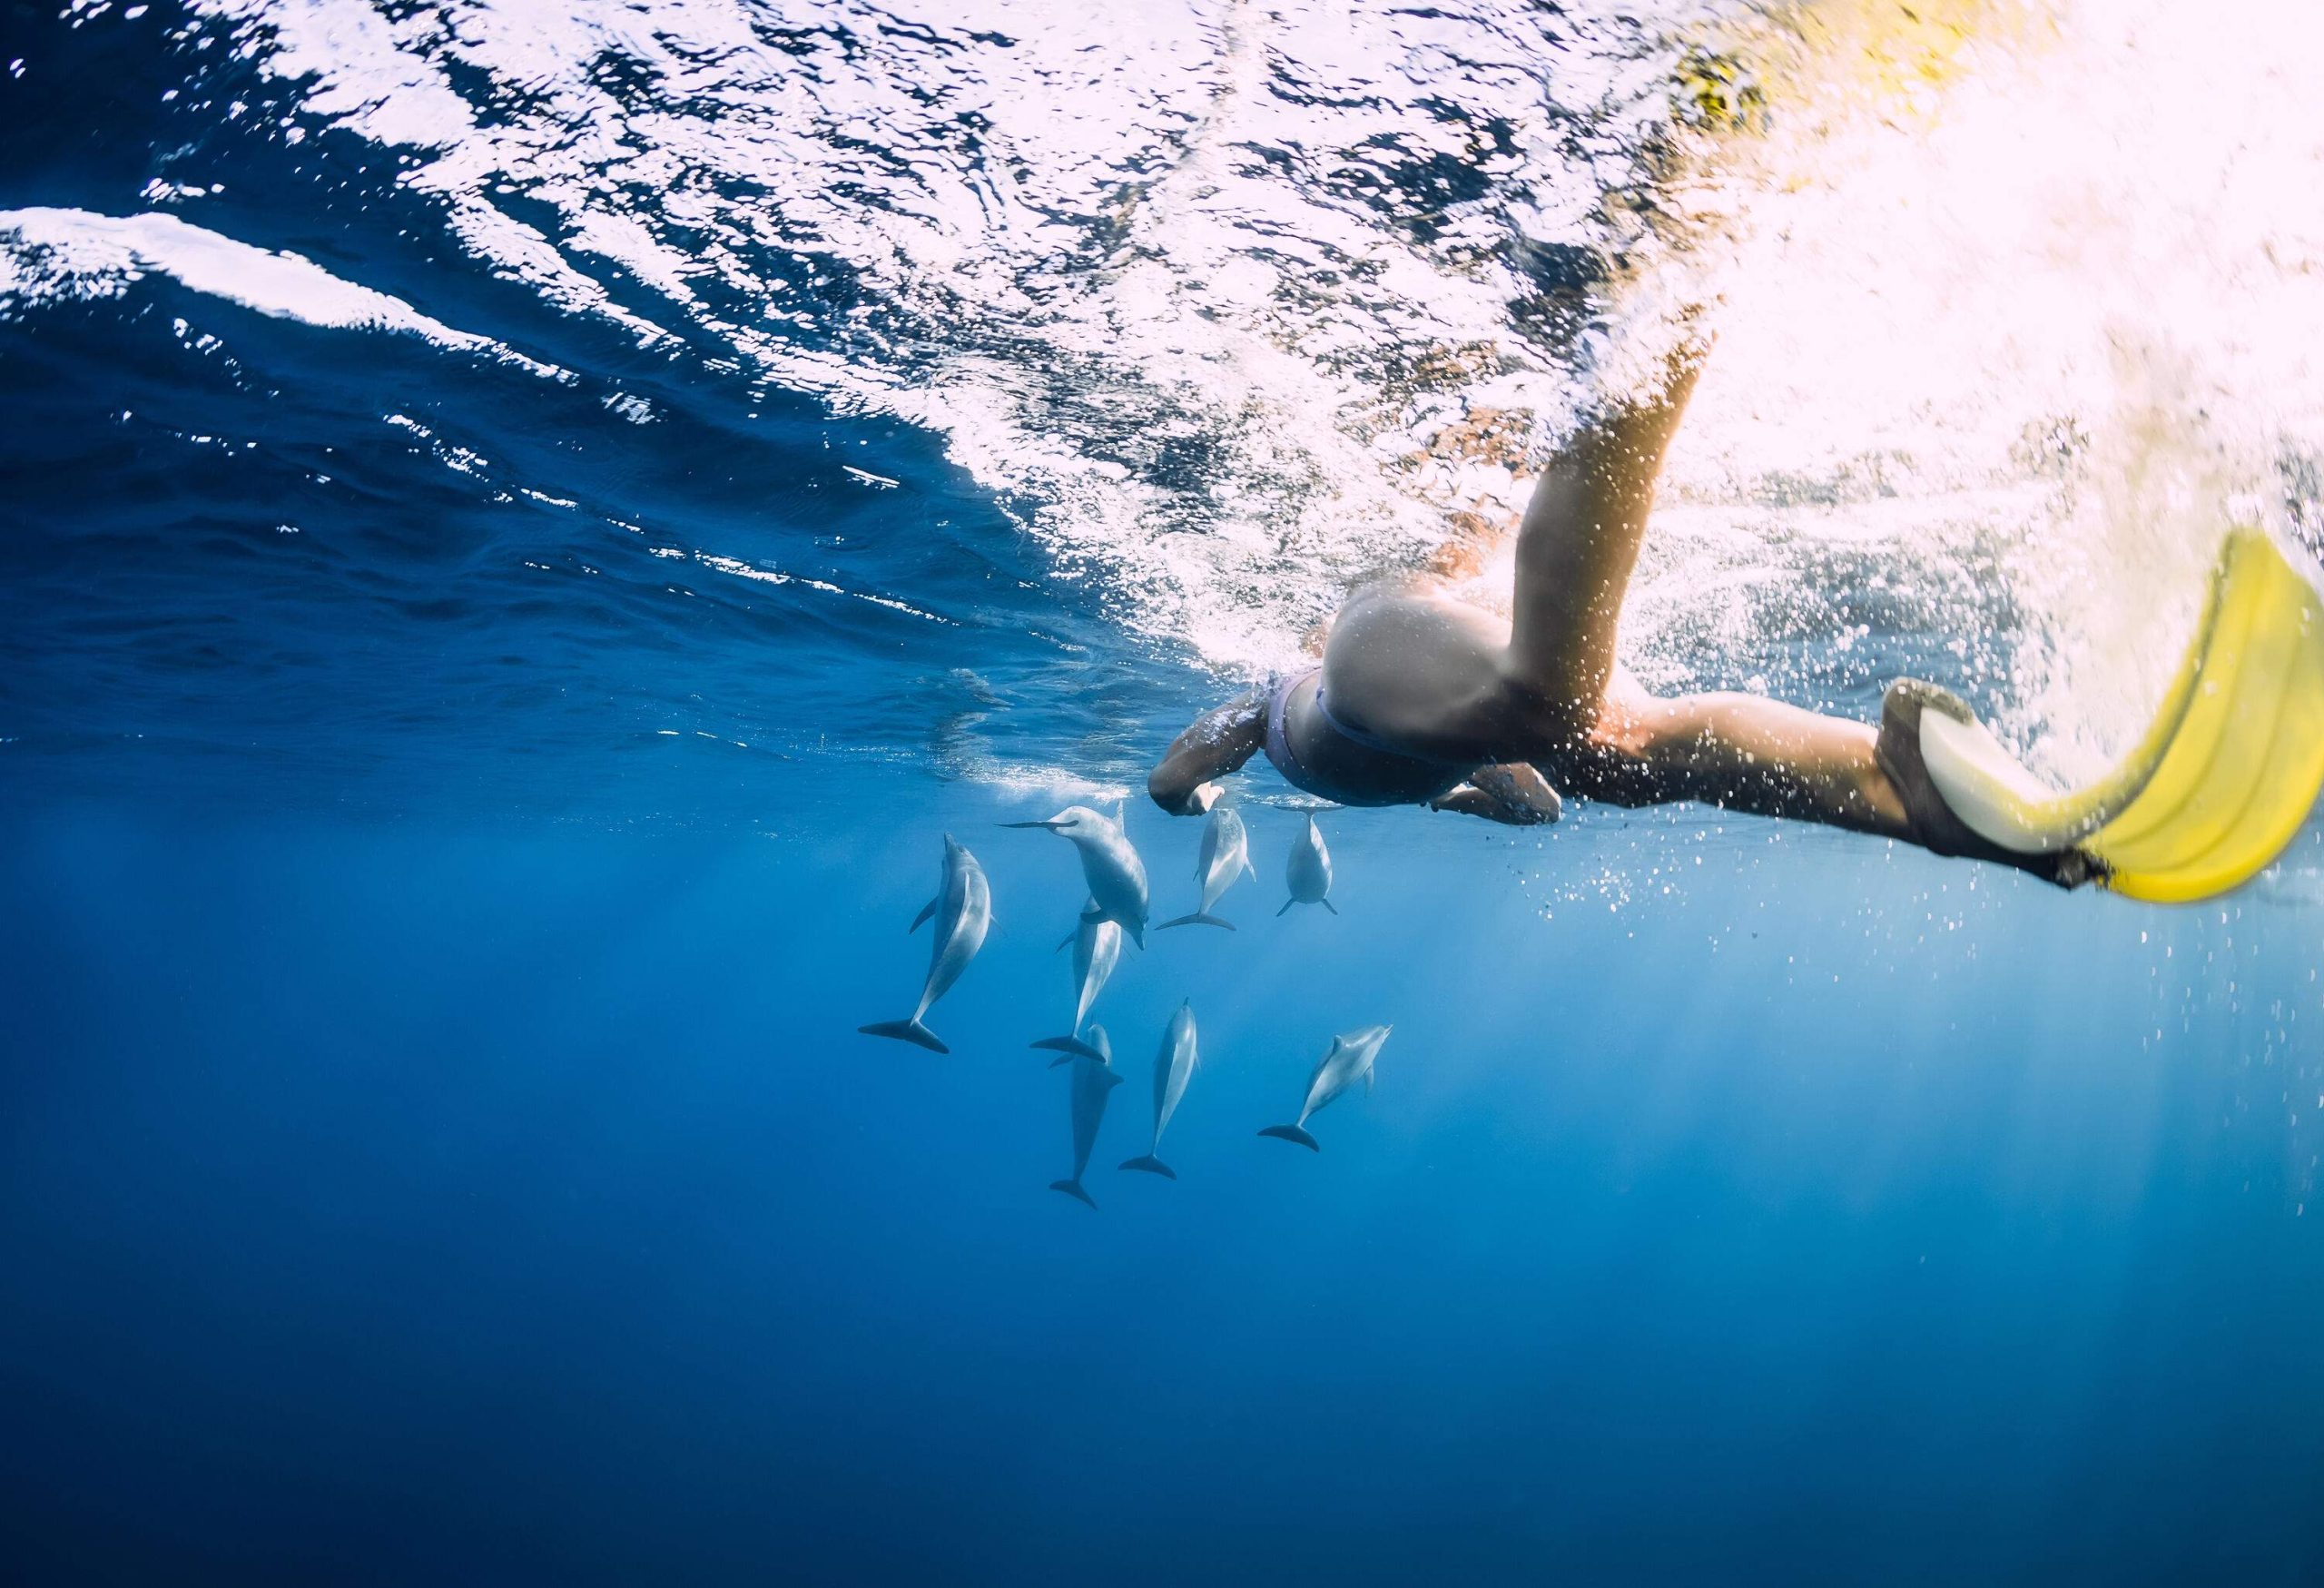 A woman snorkelling with dolphins in the sea.